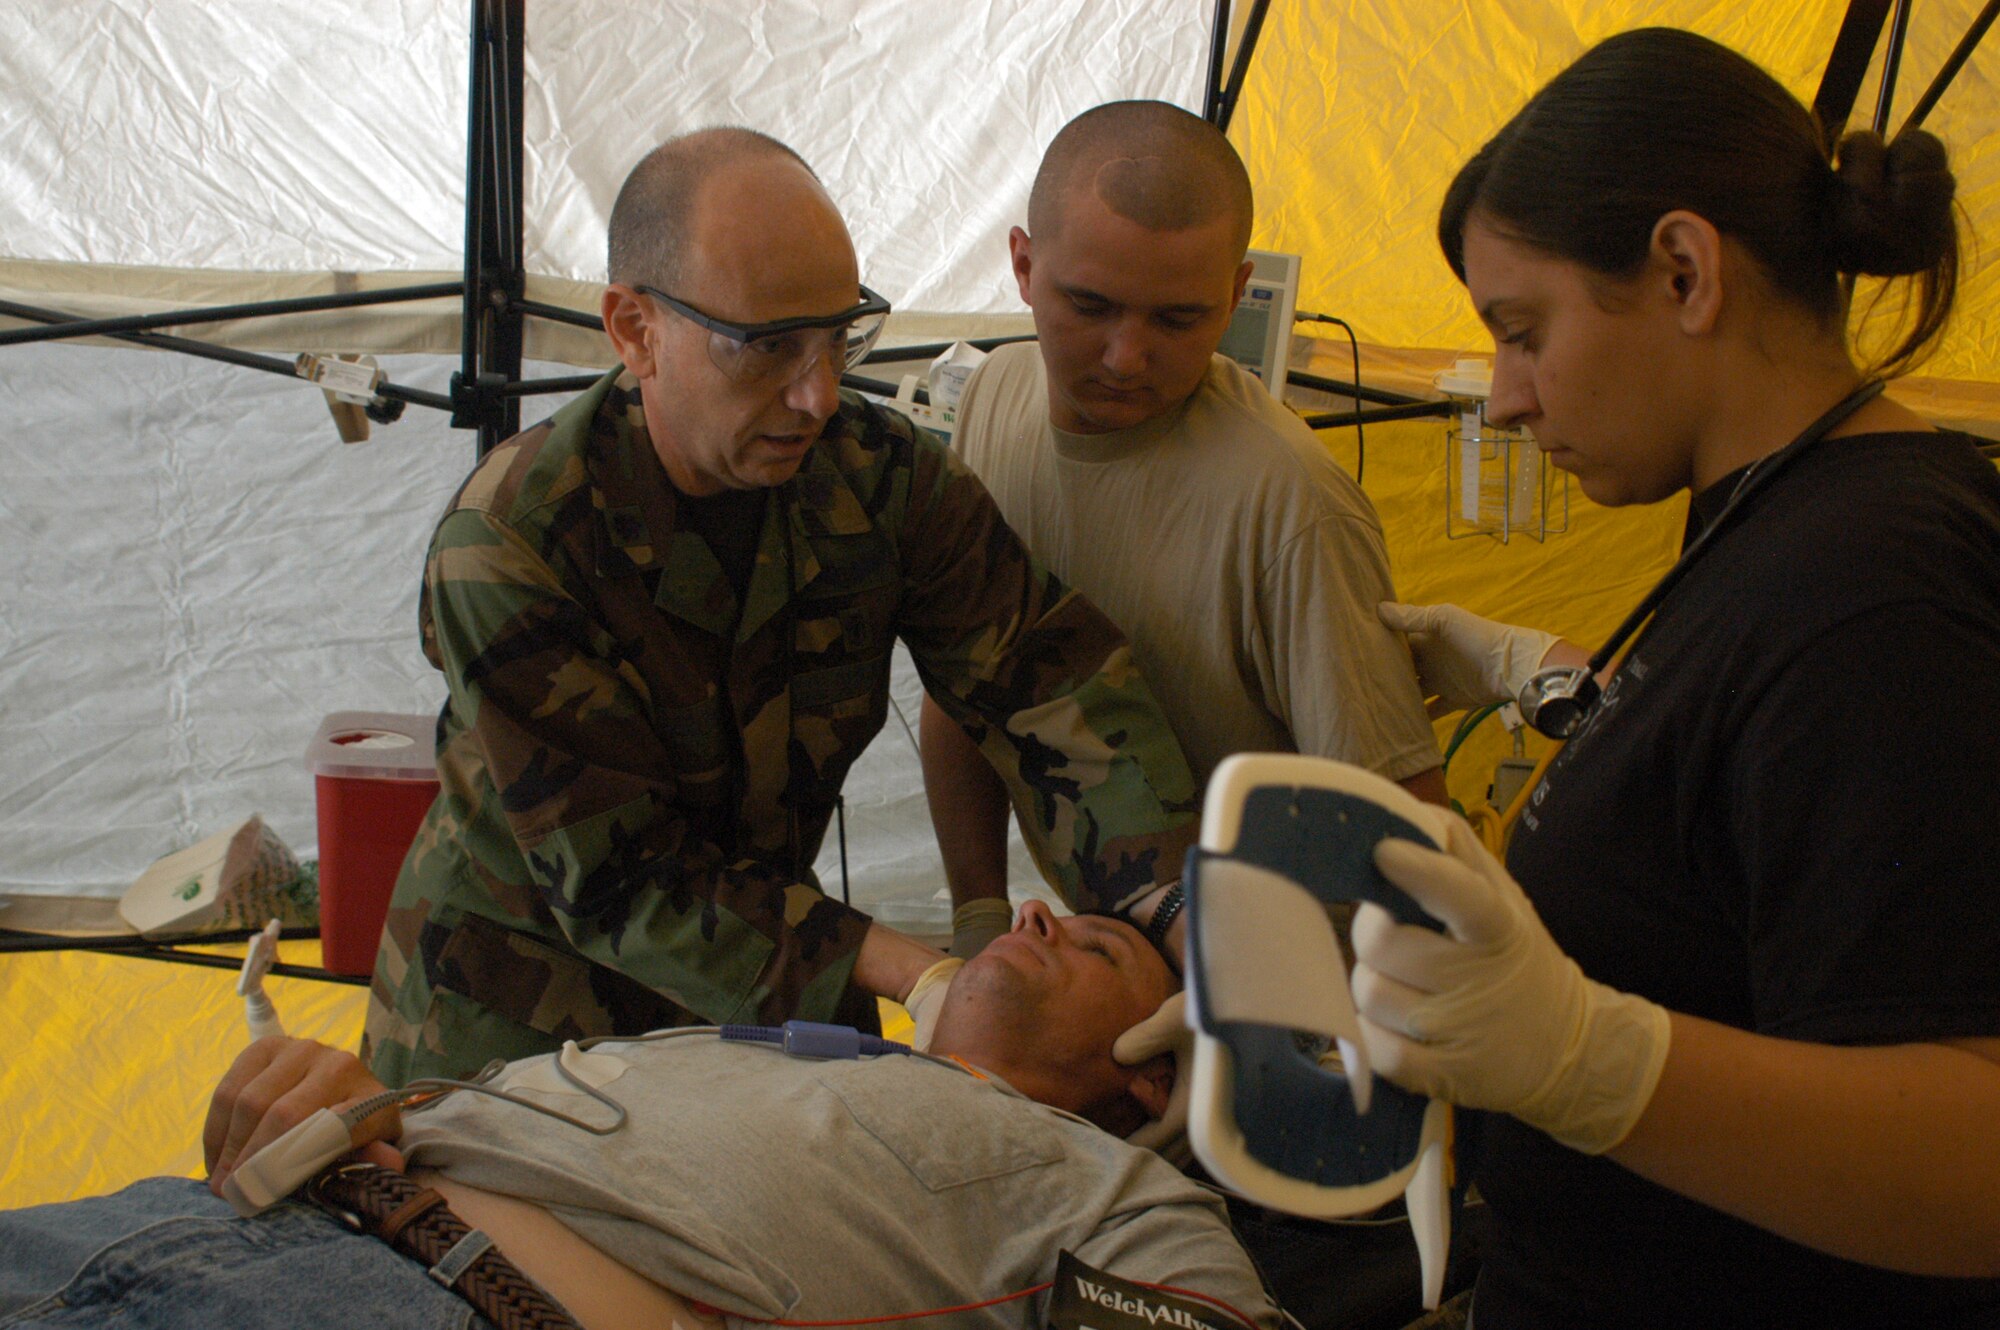 Lt. Col. Louis Perino and Senior Airman Kristen Gault, 116th Medical Group, along with Spc. Tommy Turner of the JTF 781st work along side in a joint effort to access the condition of a patient during a medical training exercise at Robins Air Force Base, Aug. 17. (Photo by Tech. Sgt. Tim Neville)